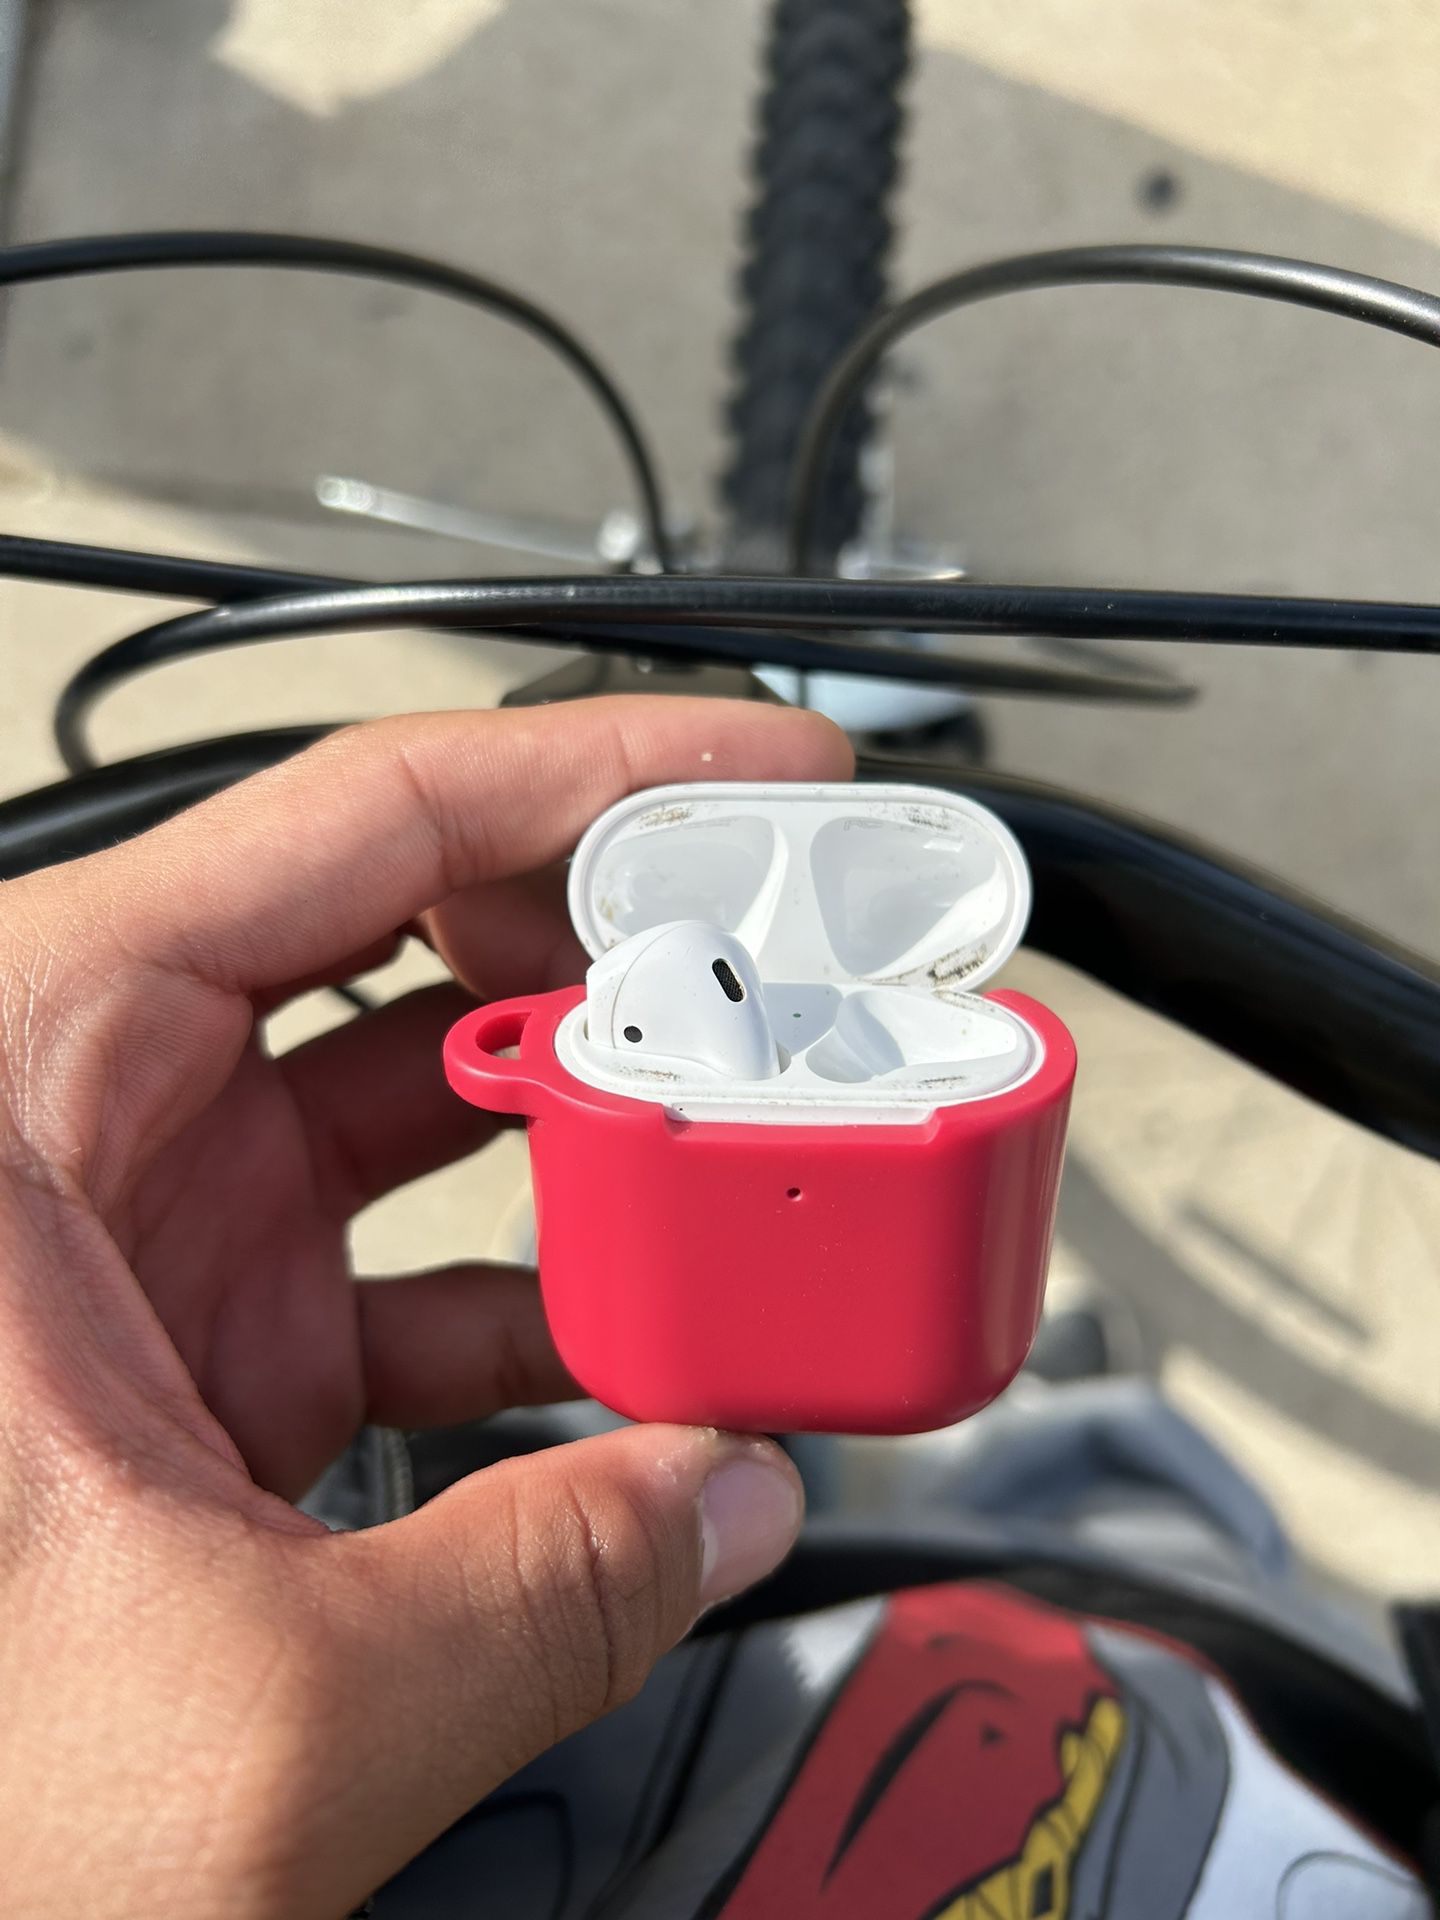 AirPod Case With Left Earbud